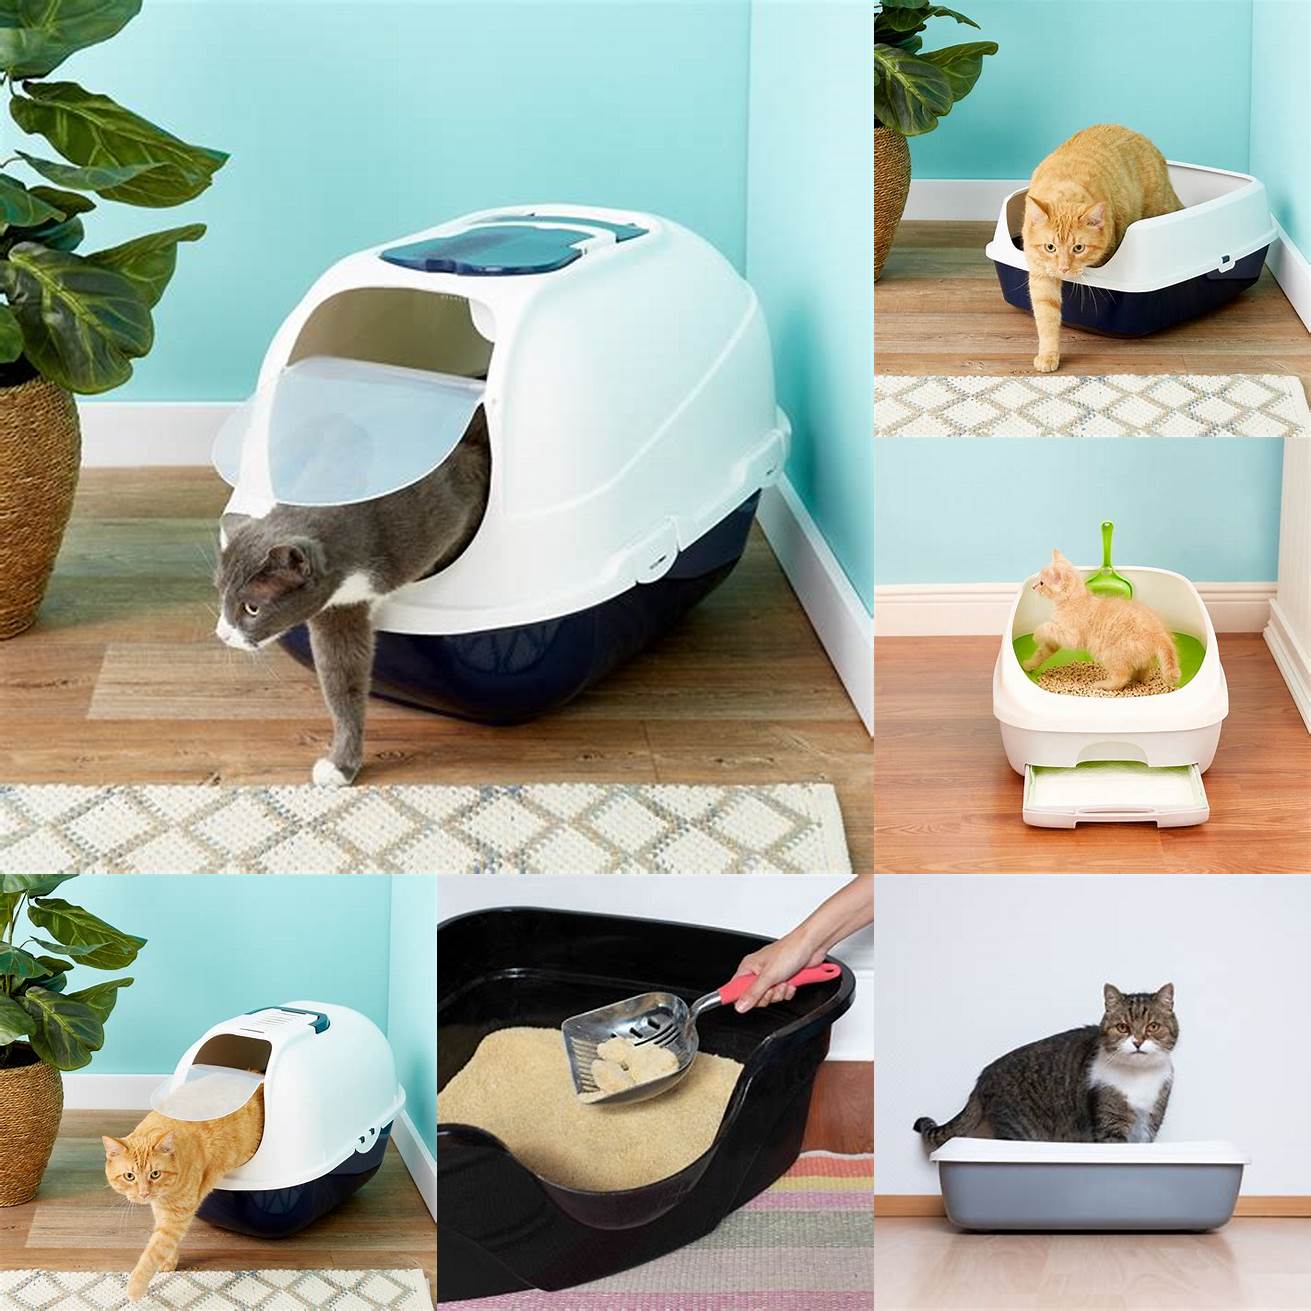 5 Replace the litter box when necessary